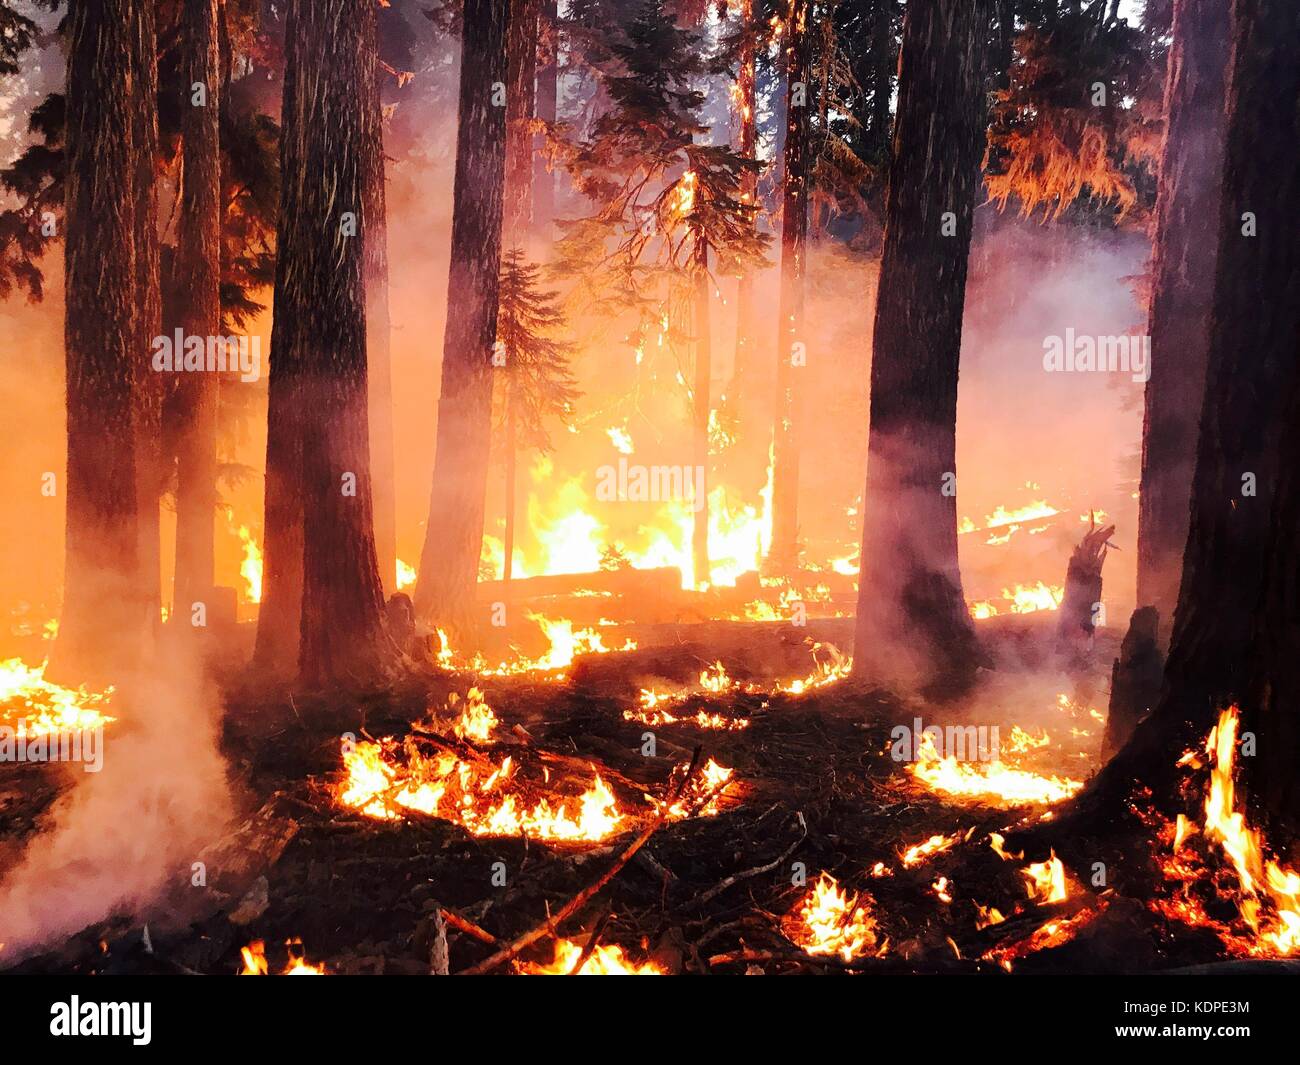 Flames consume trees in the Blanket Creek forest fire burning in the Rogue River-Siskiyou National Forest August 2, 2017 along the border of California and Oregon. Stock Photo